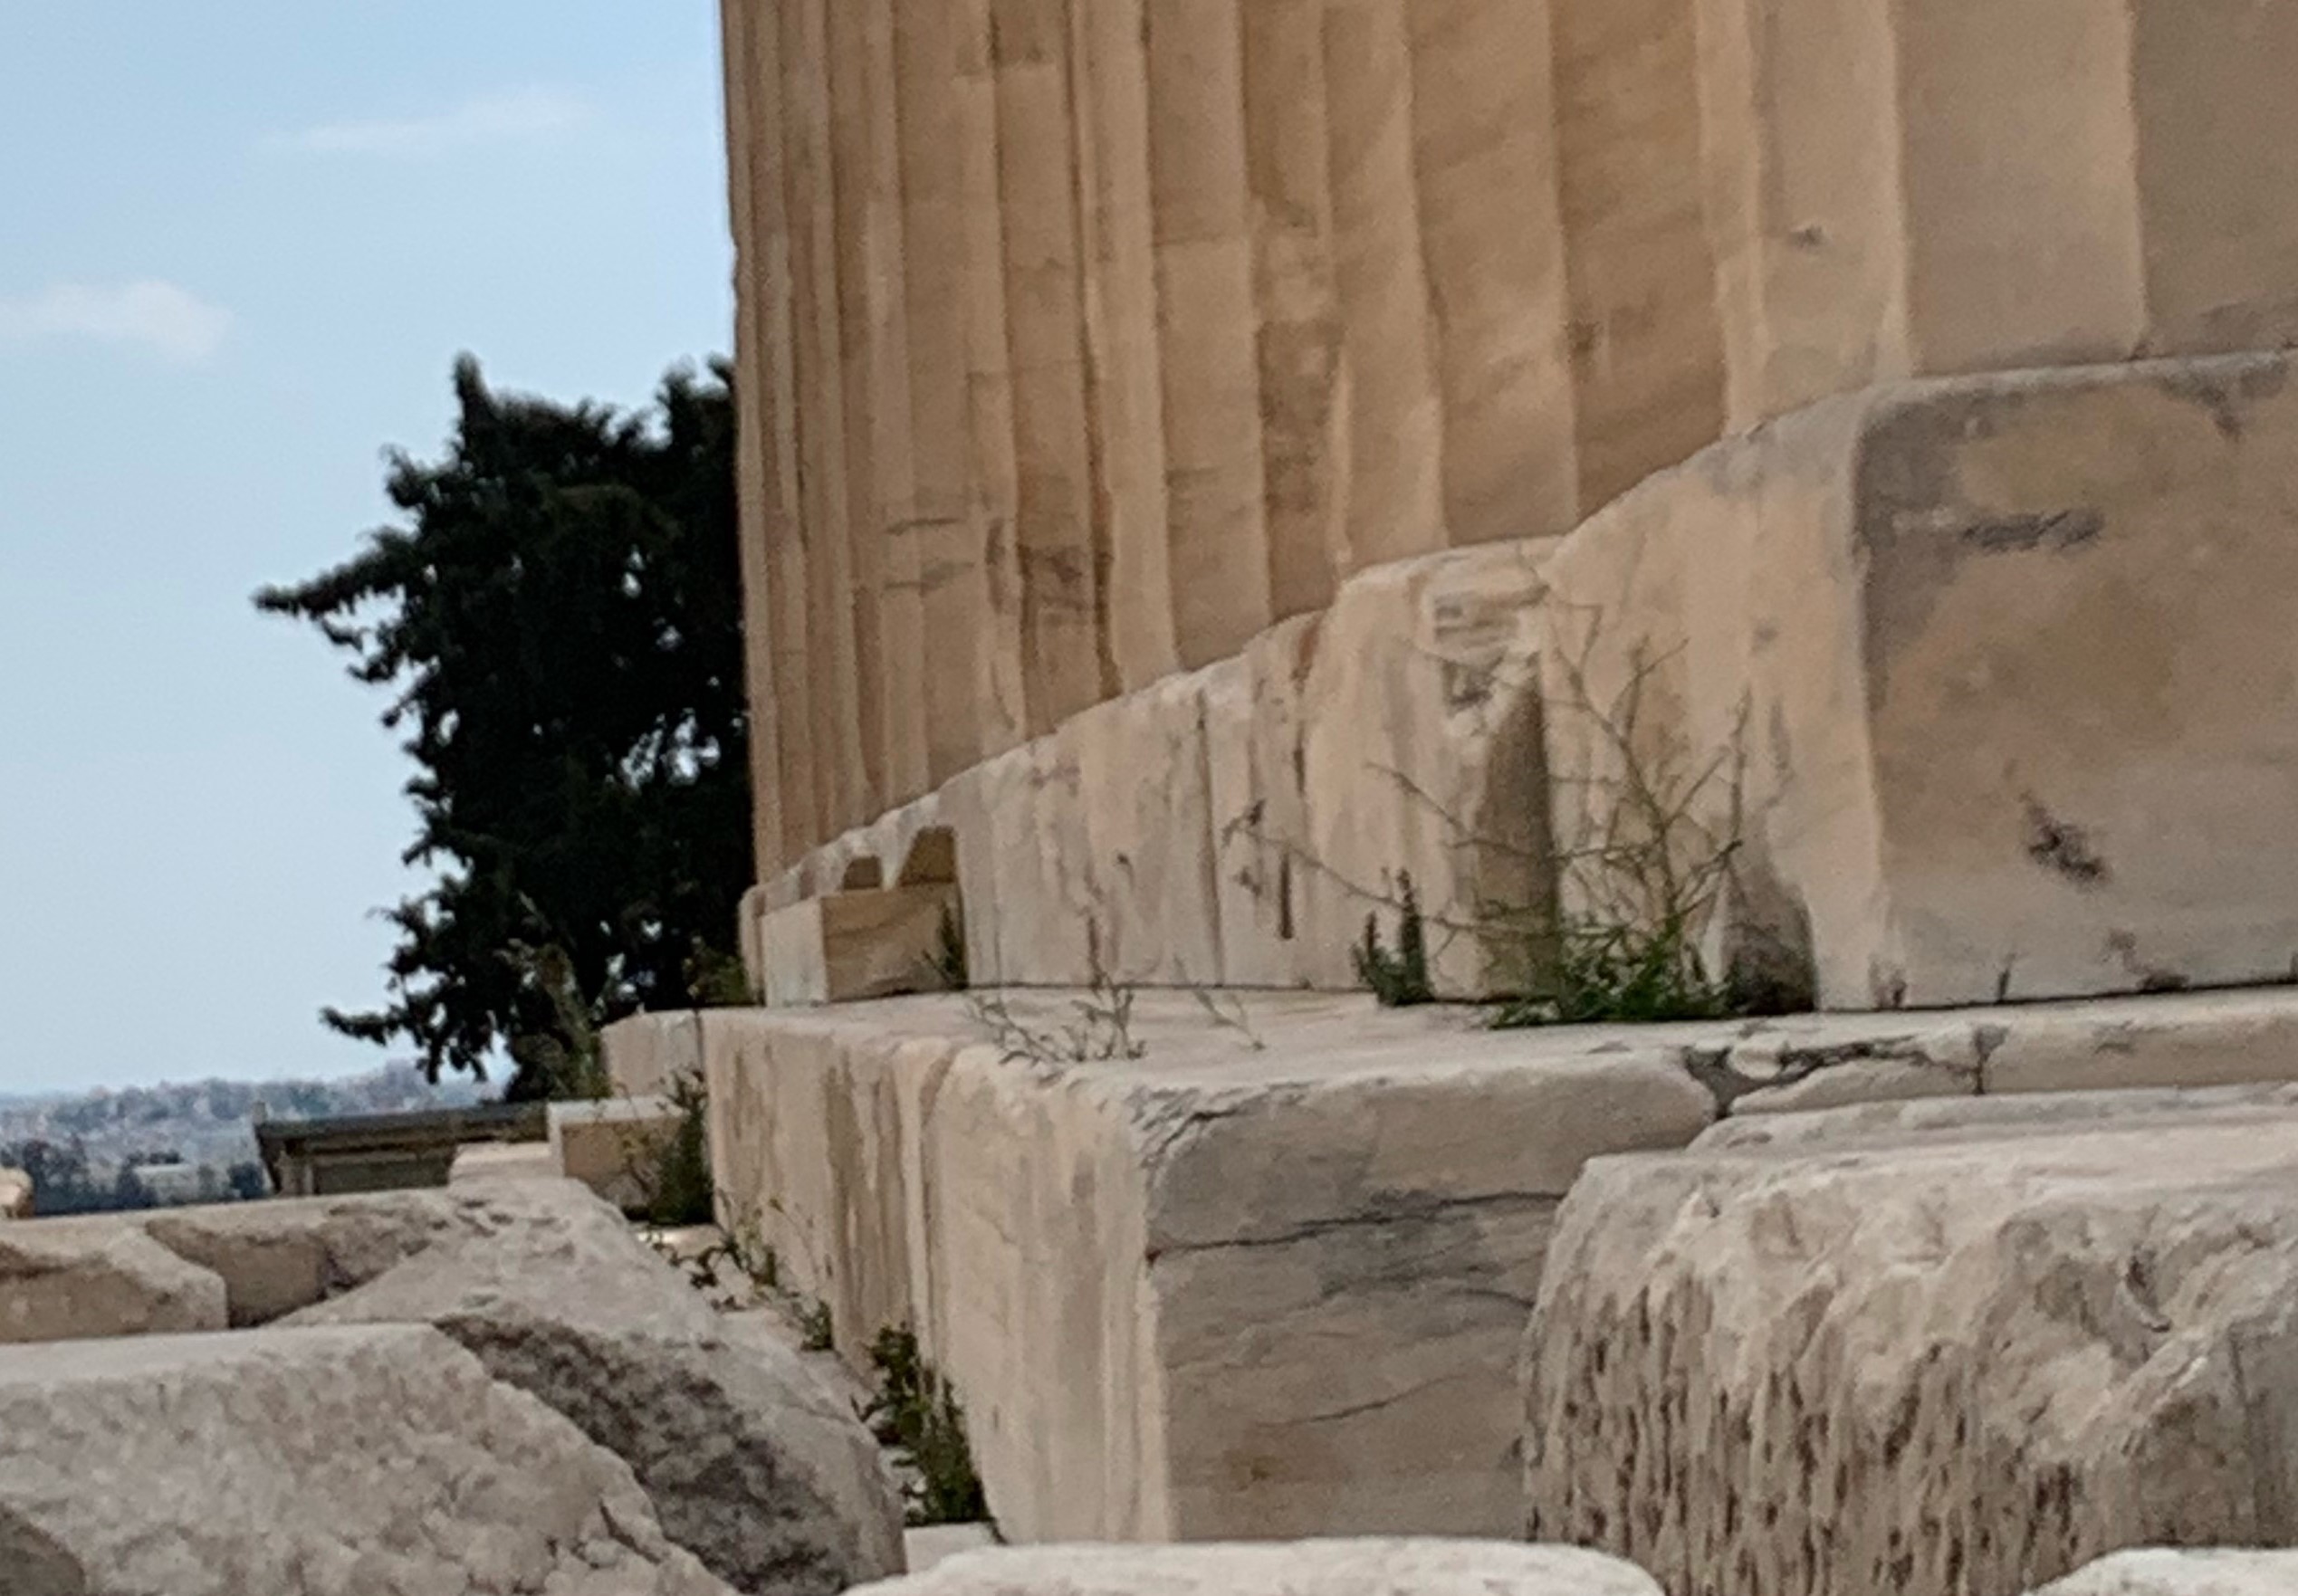 Photograph showing the curve of the floor of the Parthenon.